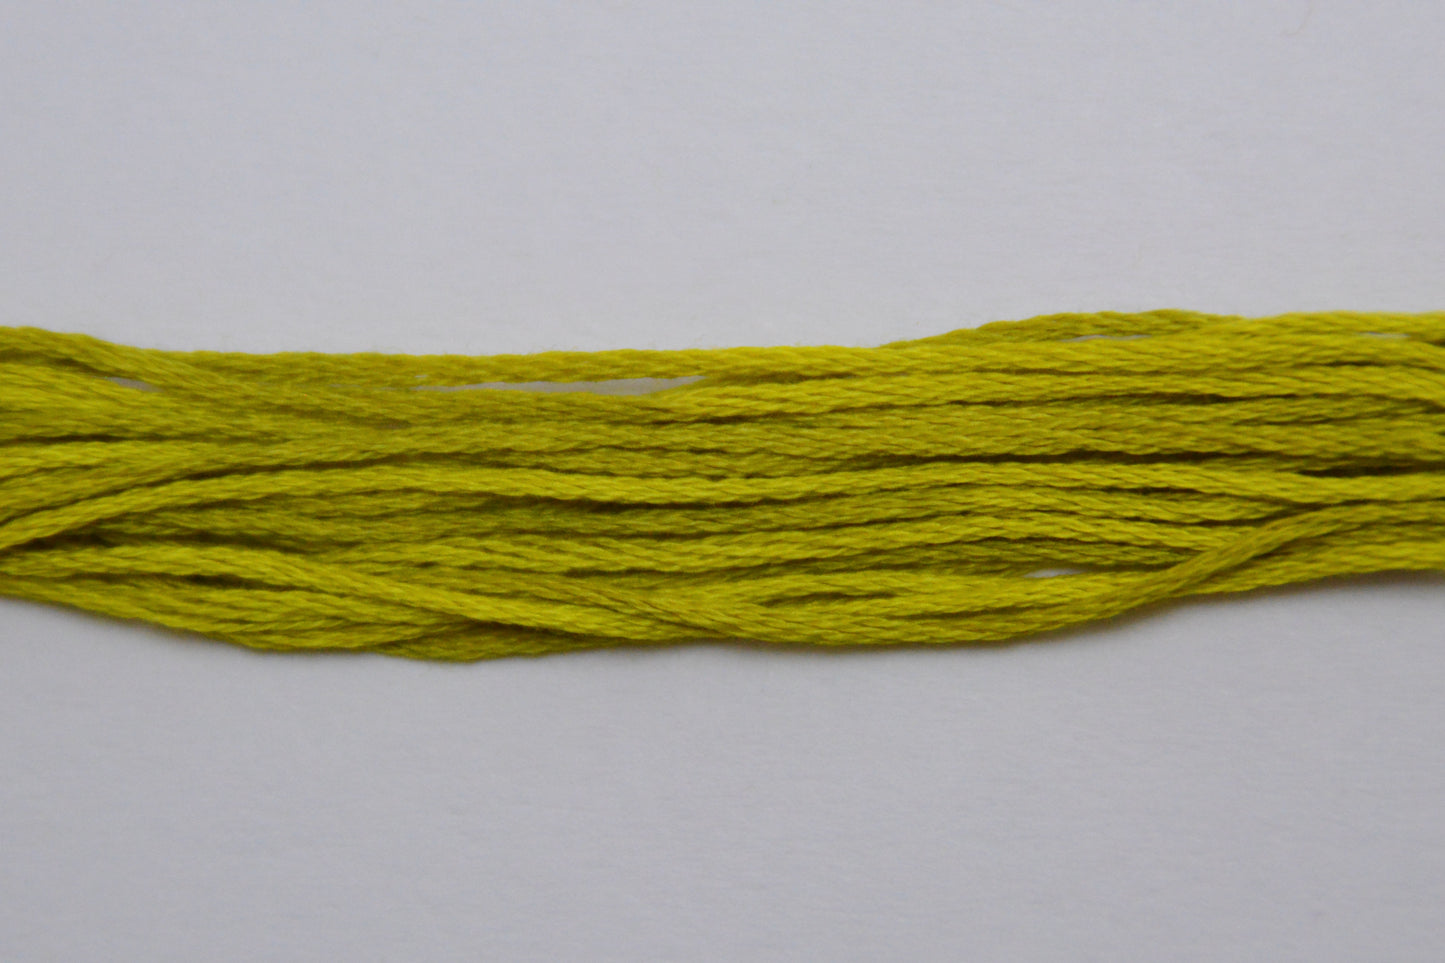 Pepperoncini 2207 Weeks Dye Works 6-Strand Hand-Dyed Embroidery Floss